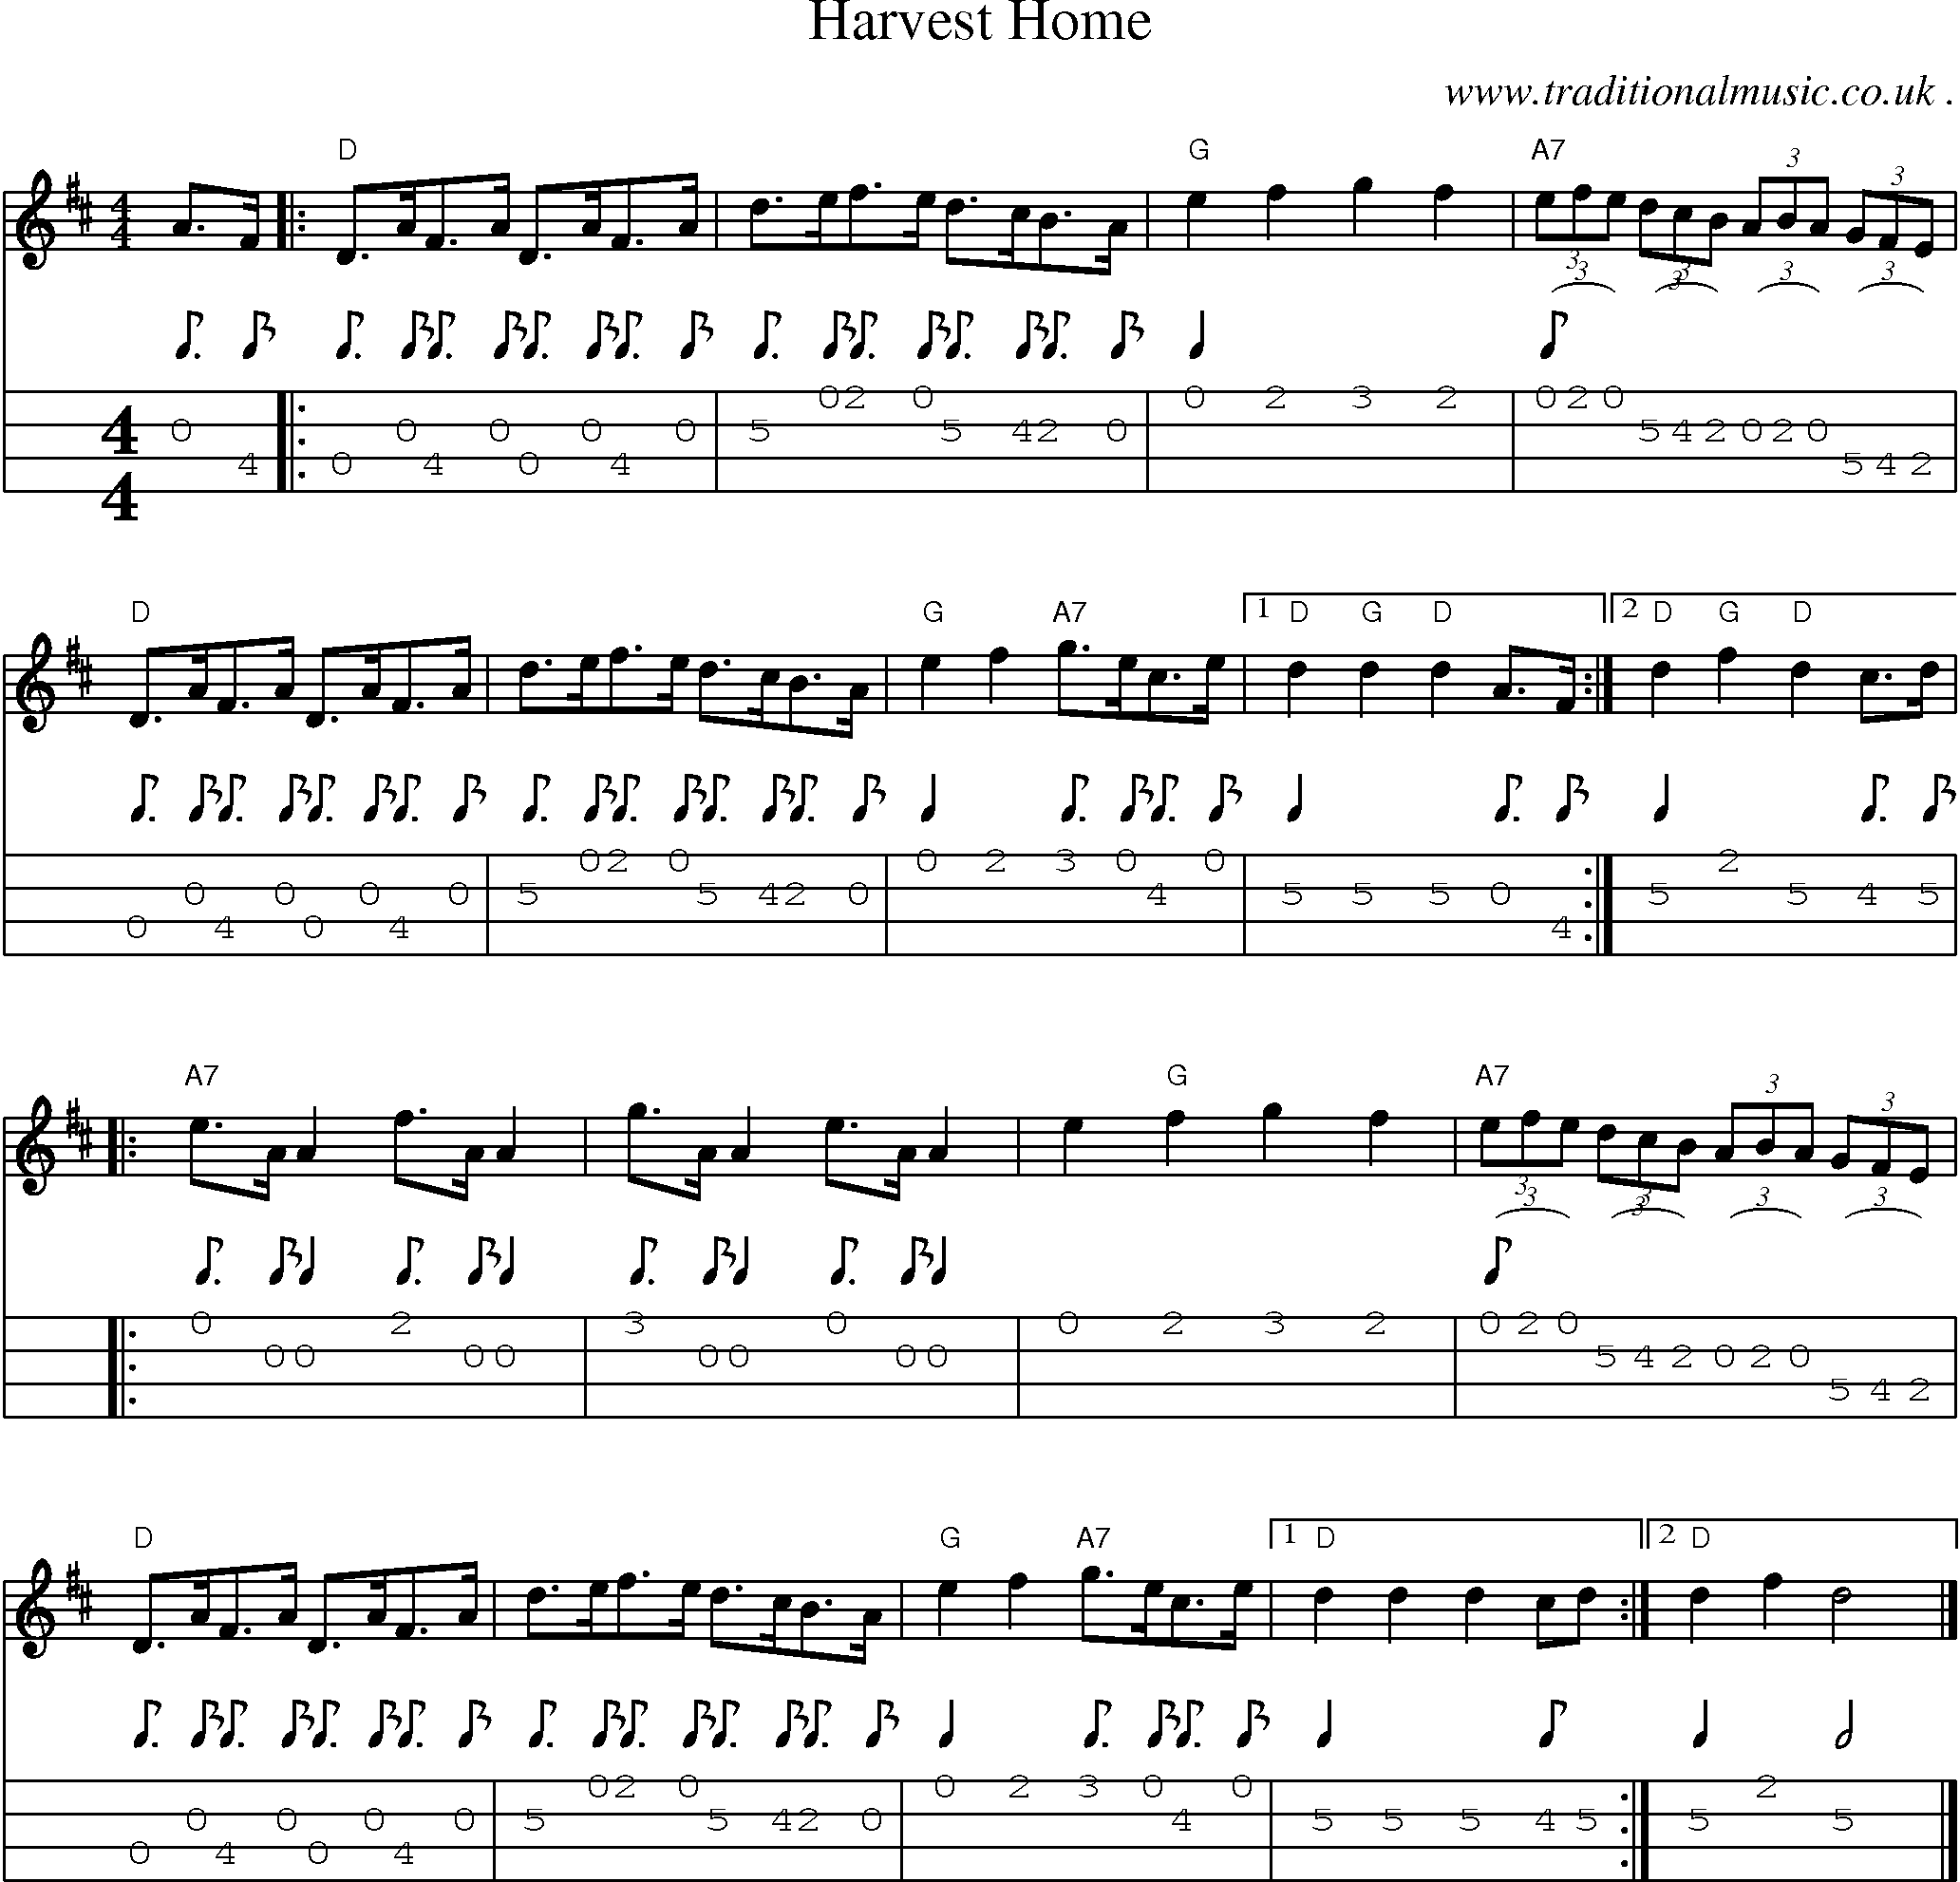 Music Score and Guitar Tabs for Harvest Home